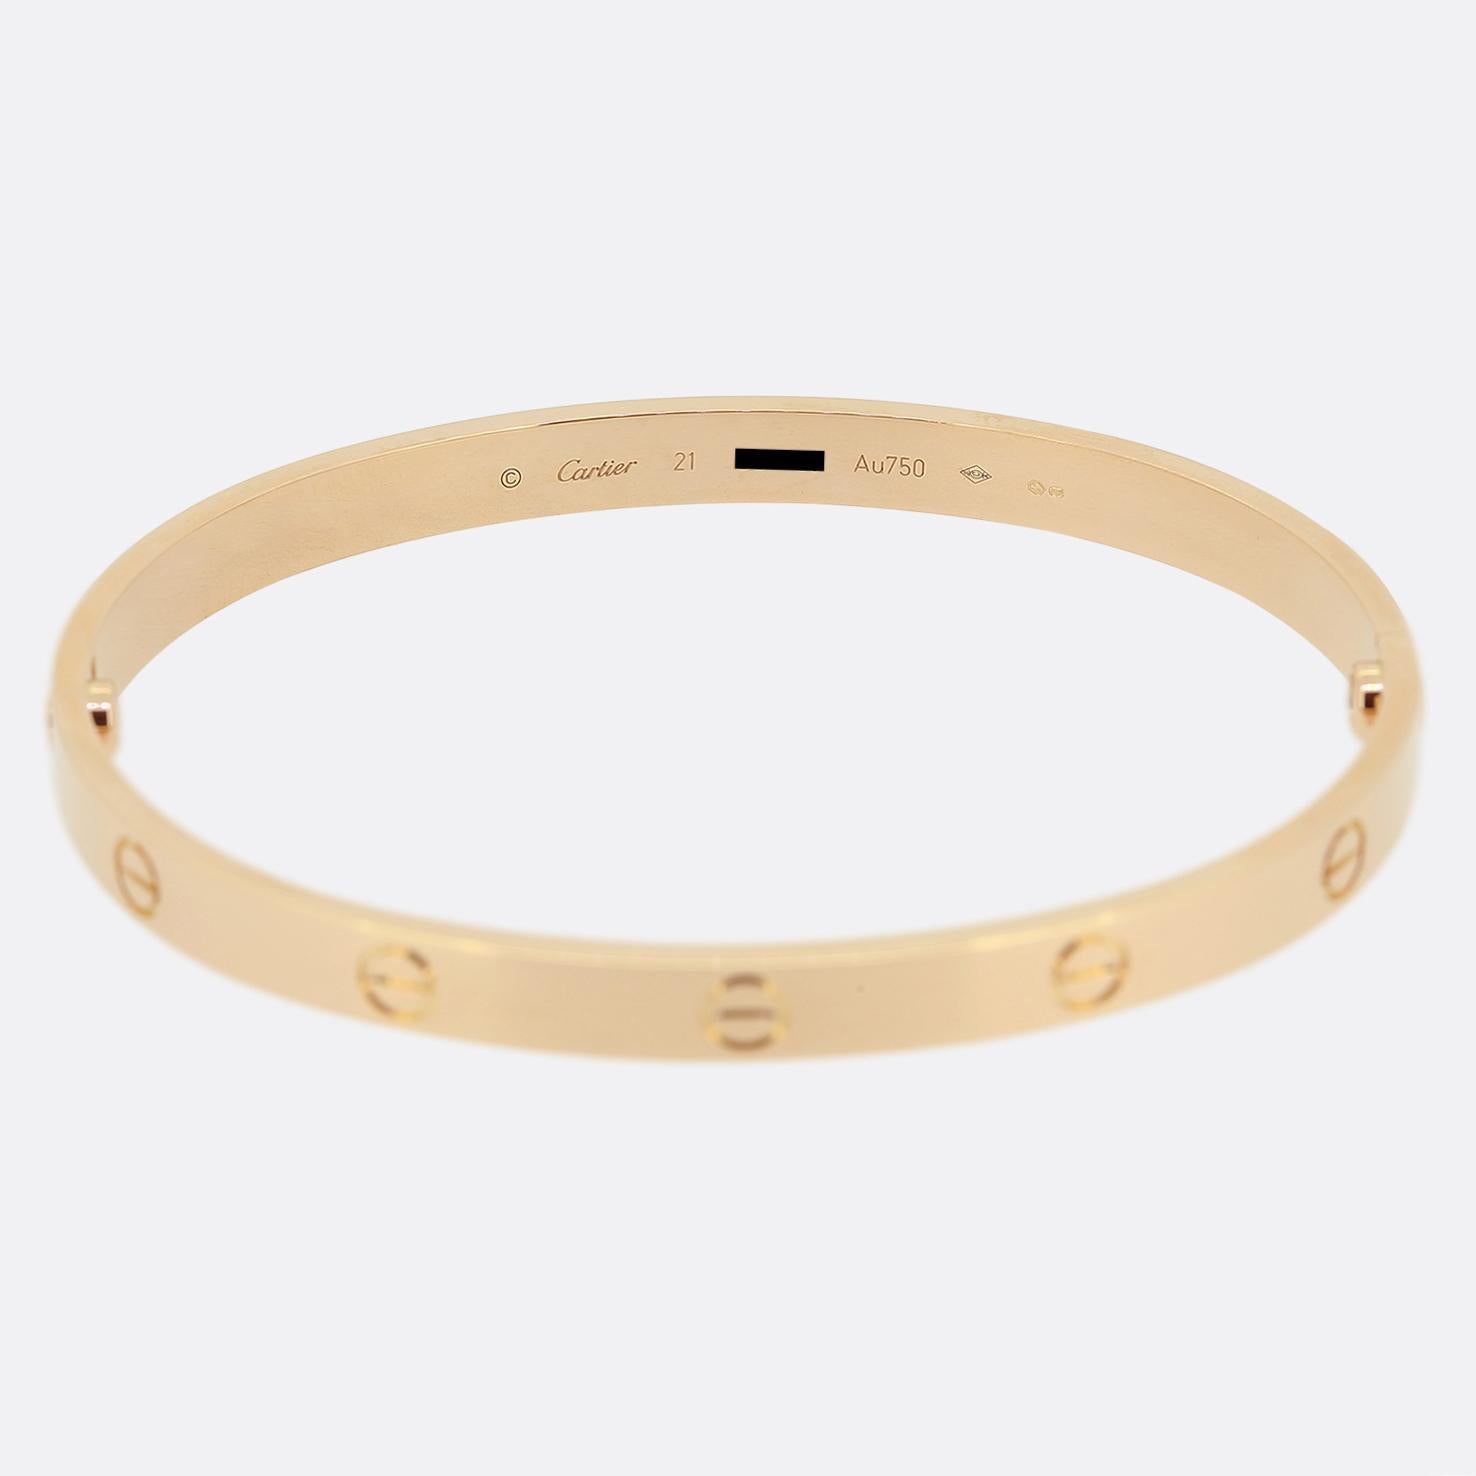 Here we have an 18ct rose gold bangle from the world renowned luxury jewellery house of Cartier. This bangle forms part of the LOVE collection and is one of the most celebrated items of jewellery in the world. This particular model features the